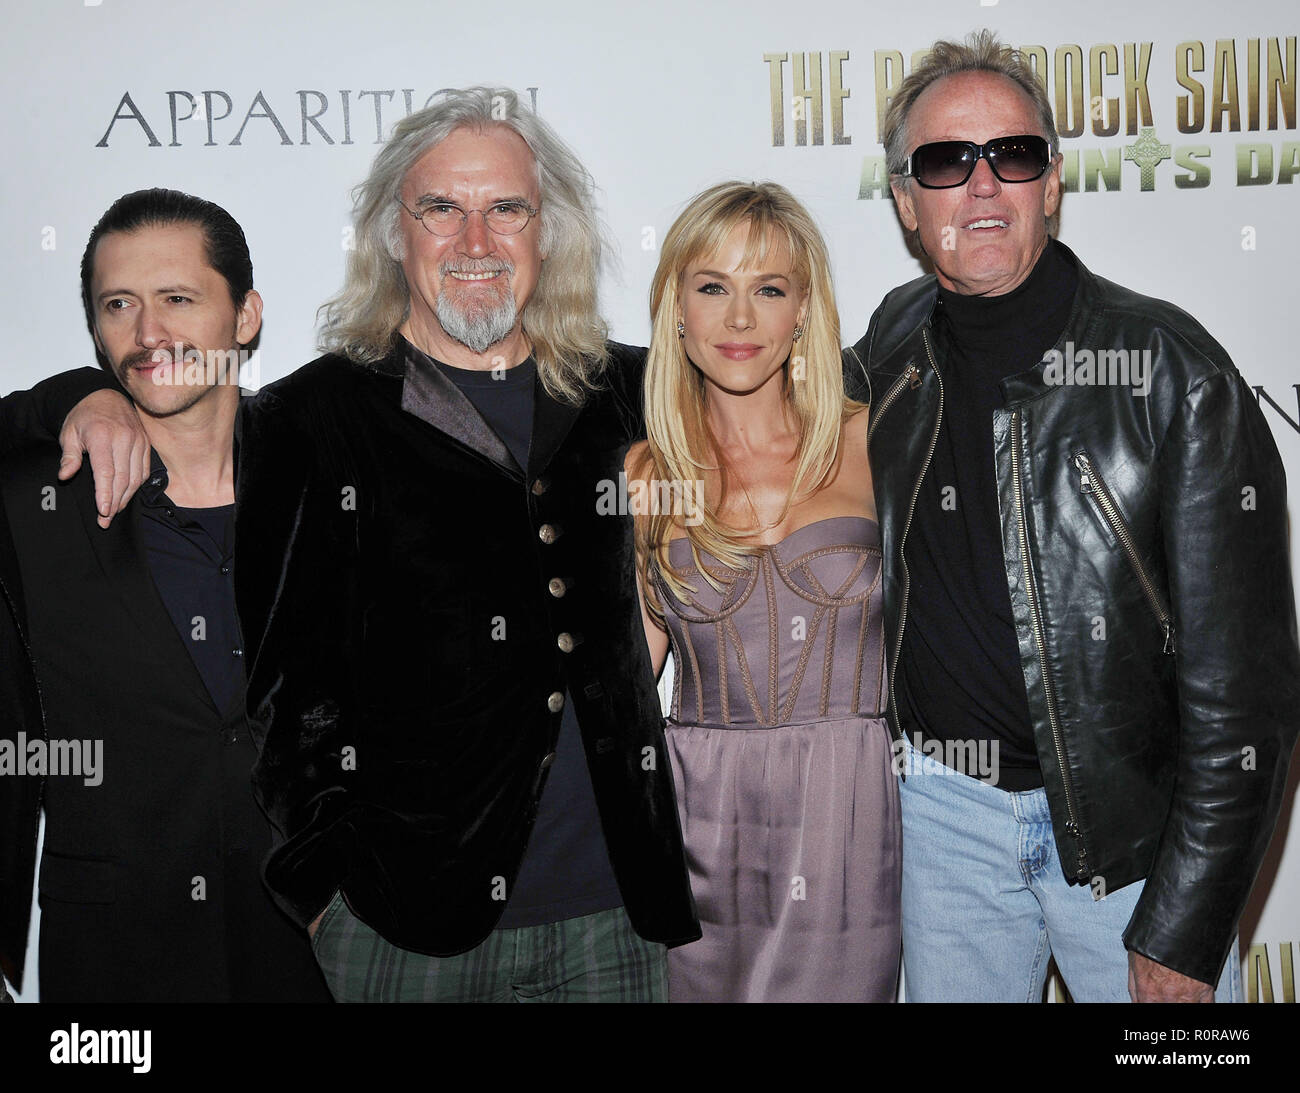 Clifton Colins Jr, Billy Connolly, Julie Benz and Peter Fonda - The Boondock Saints II  Premiere at the Arclight Theatre In Los Angeles.          -    Stock Photo